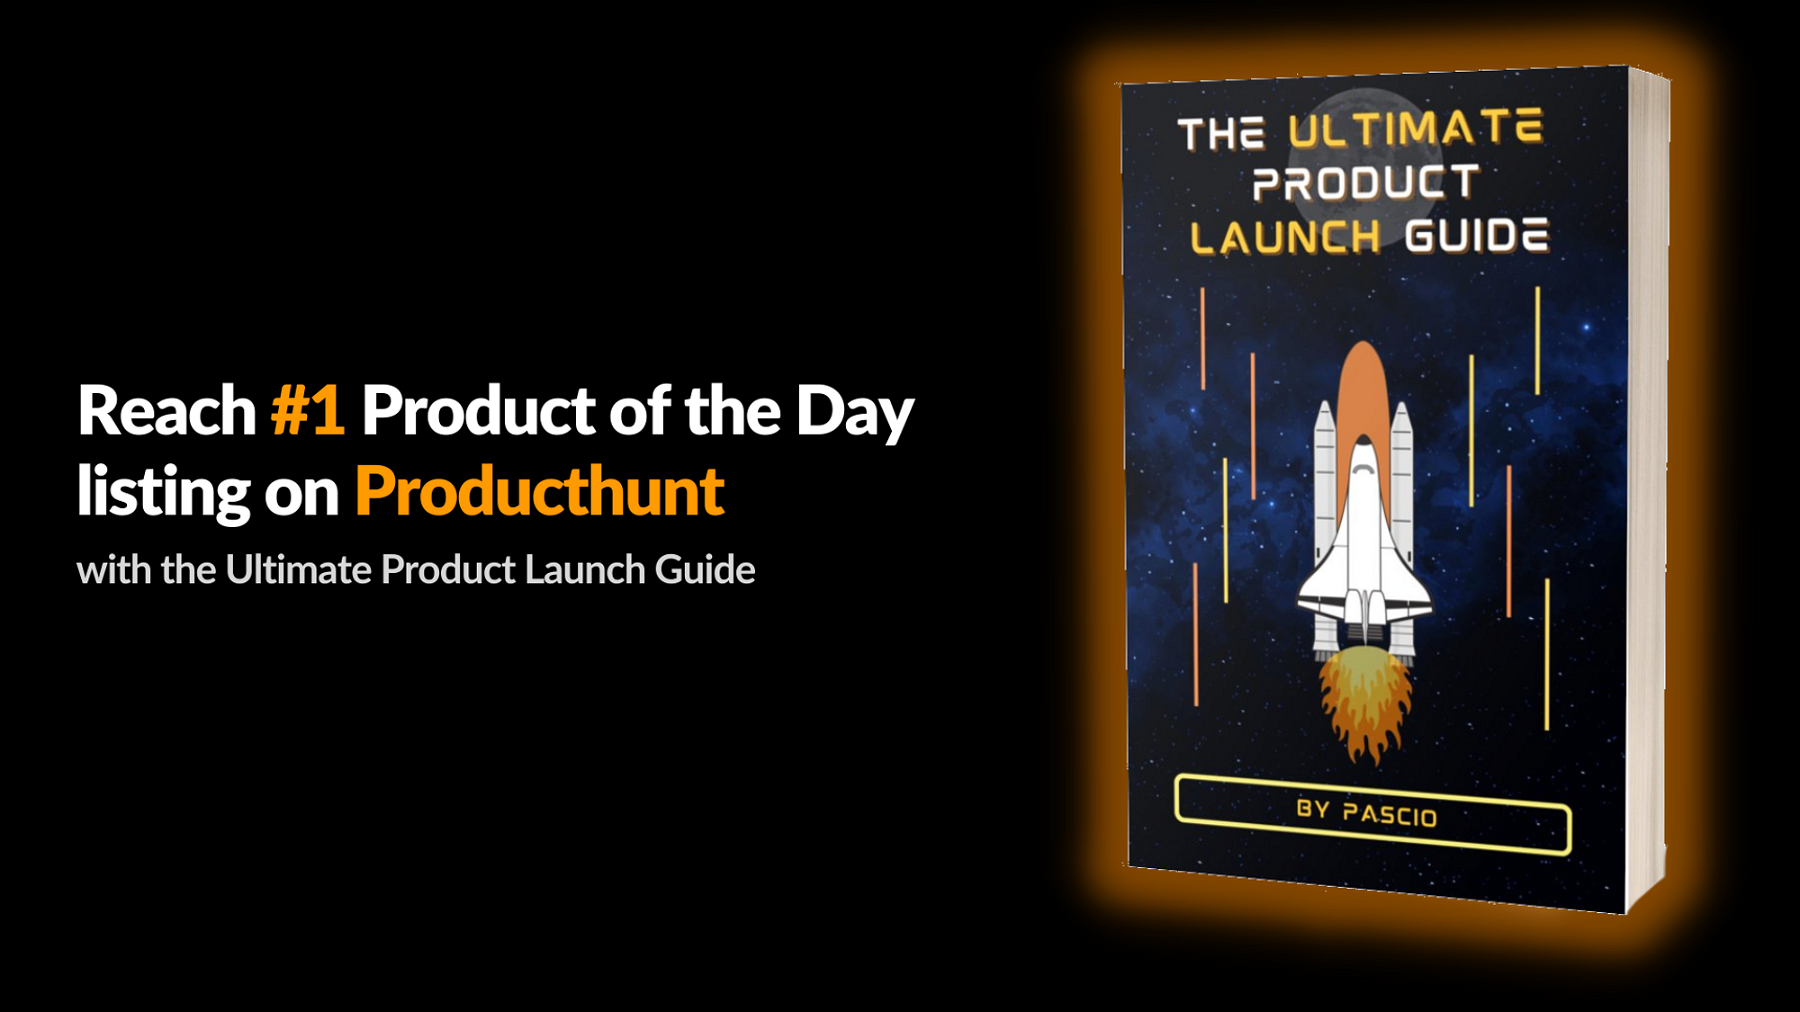 The Ultimate Product Launch Guide